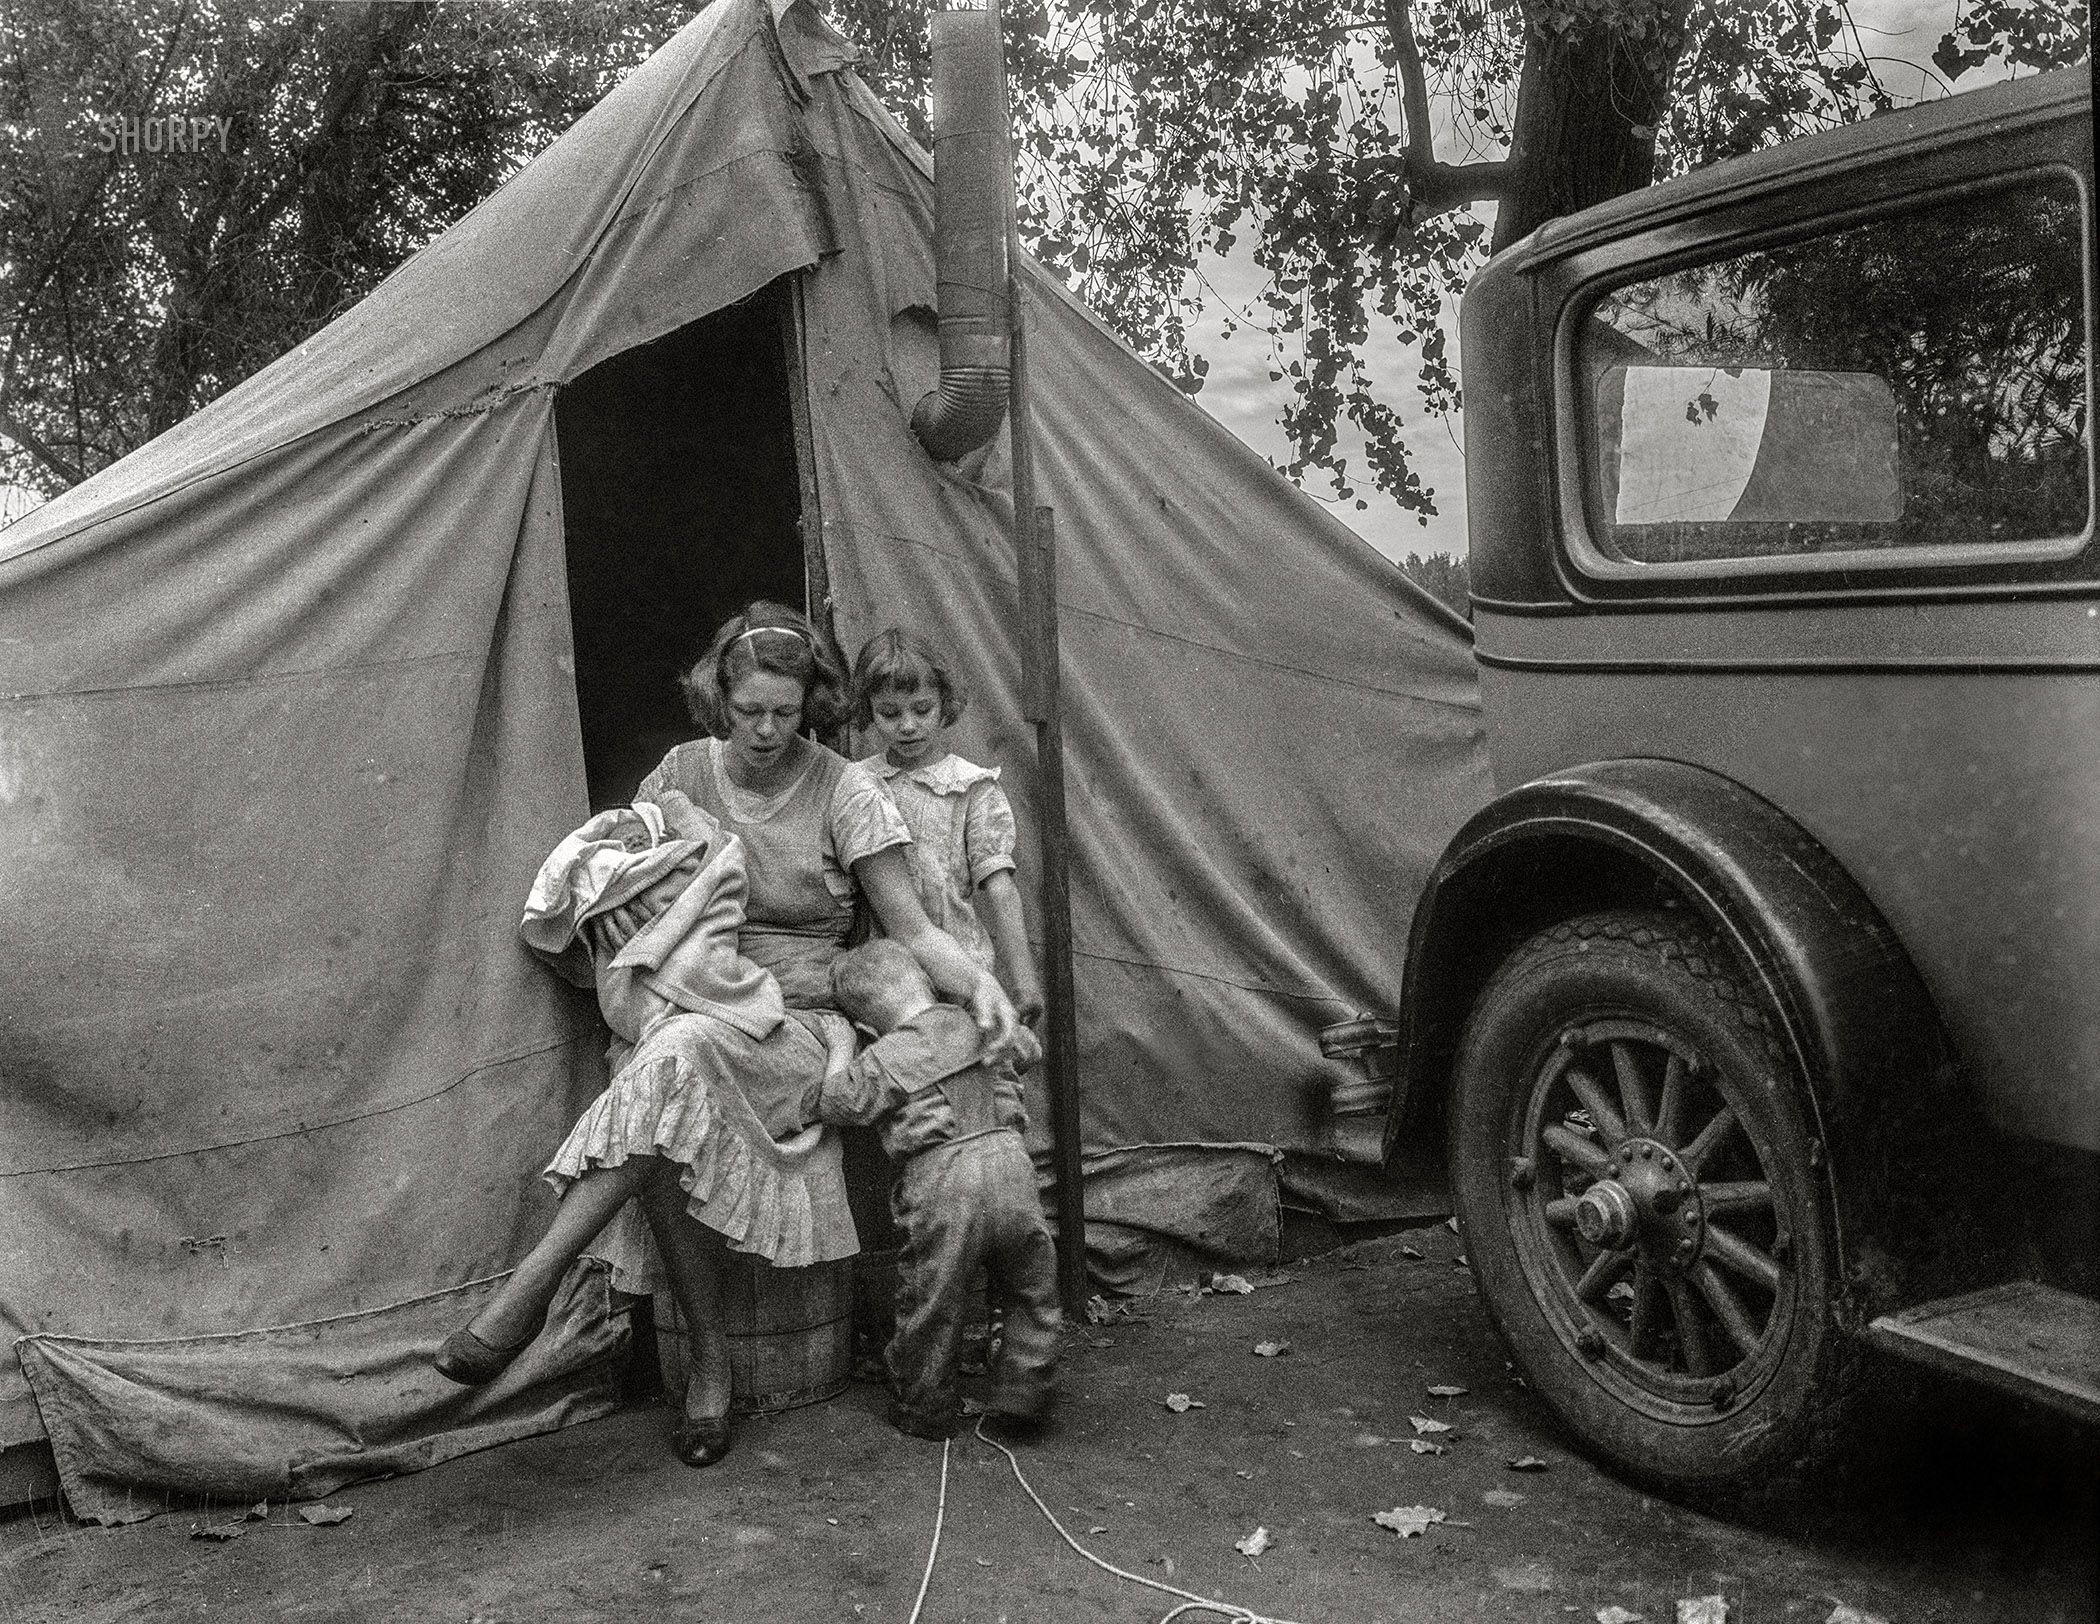 November 1936. "Mother and three children in a California squatter camp." 4x5 inch nitrate negative by Dorothea Lange for the Resettlement Administration. View full size.
&nbsp; &nbsp; &nbsp; &nbsp; Photo from this group of 211 images, which includes Lange's "Migrant Mother": Migrant agricultural workers in California in 1936. Photographs show squatter camps. Little Oklahoma. Families and their belongings in automobiles on the road. Car trouble along the road. Families existing in tent camps. Company housing for Mexican cotton pickers. Portraits of destitute migrants and their children. Hitch-hikers. Beet fields. Cotton pickers in the San Joaquin Valley. Lettuce and pea fields.